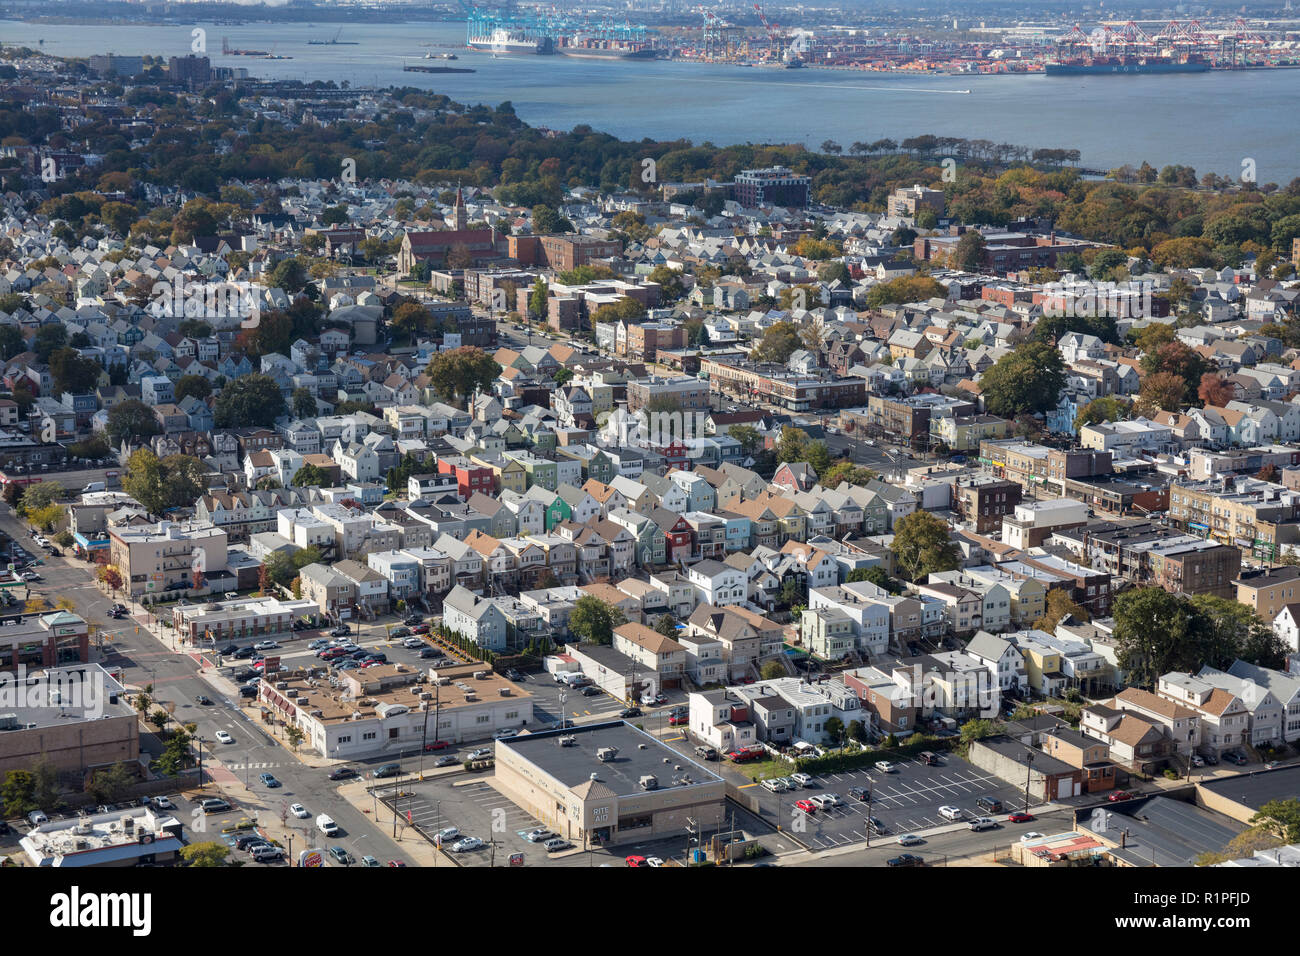 helicopter aerial view of street grid of Bayonne city, New Jersey, USA Stock Photo